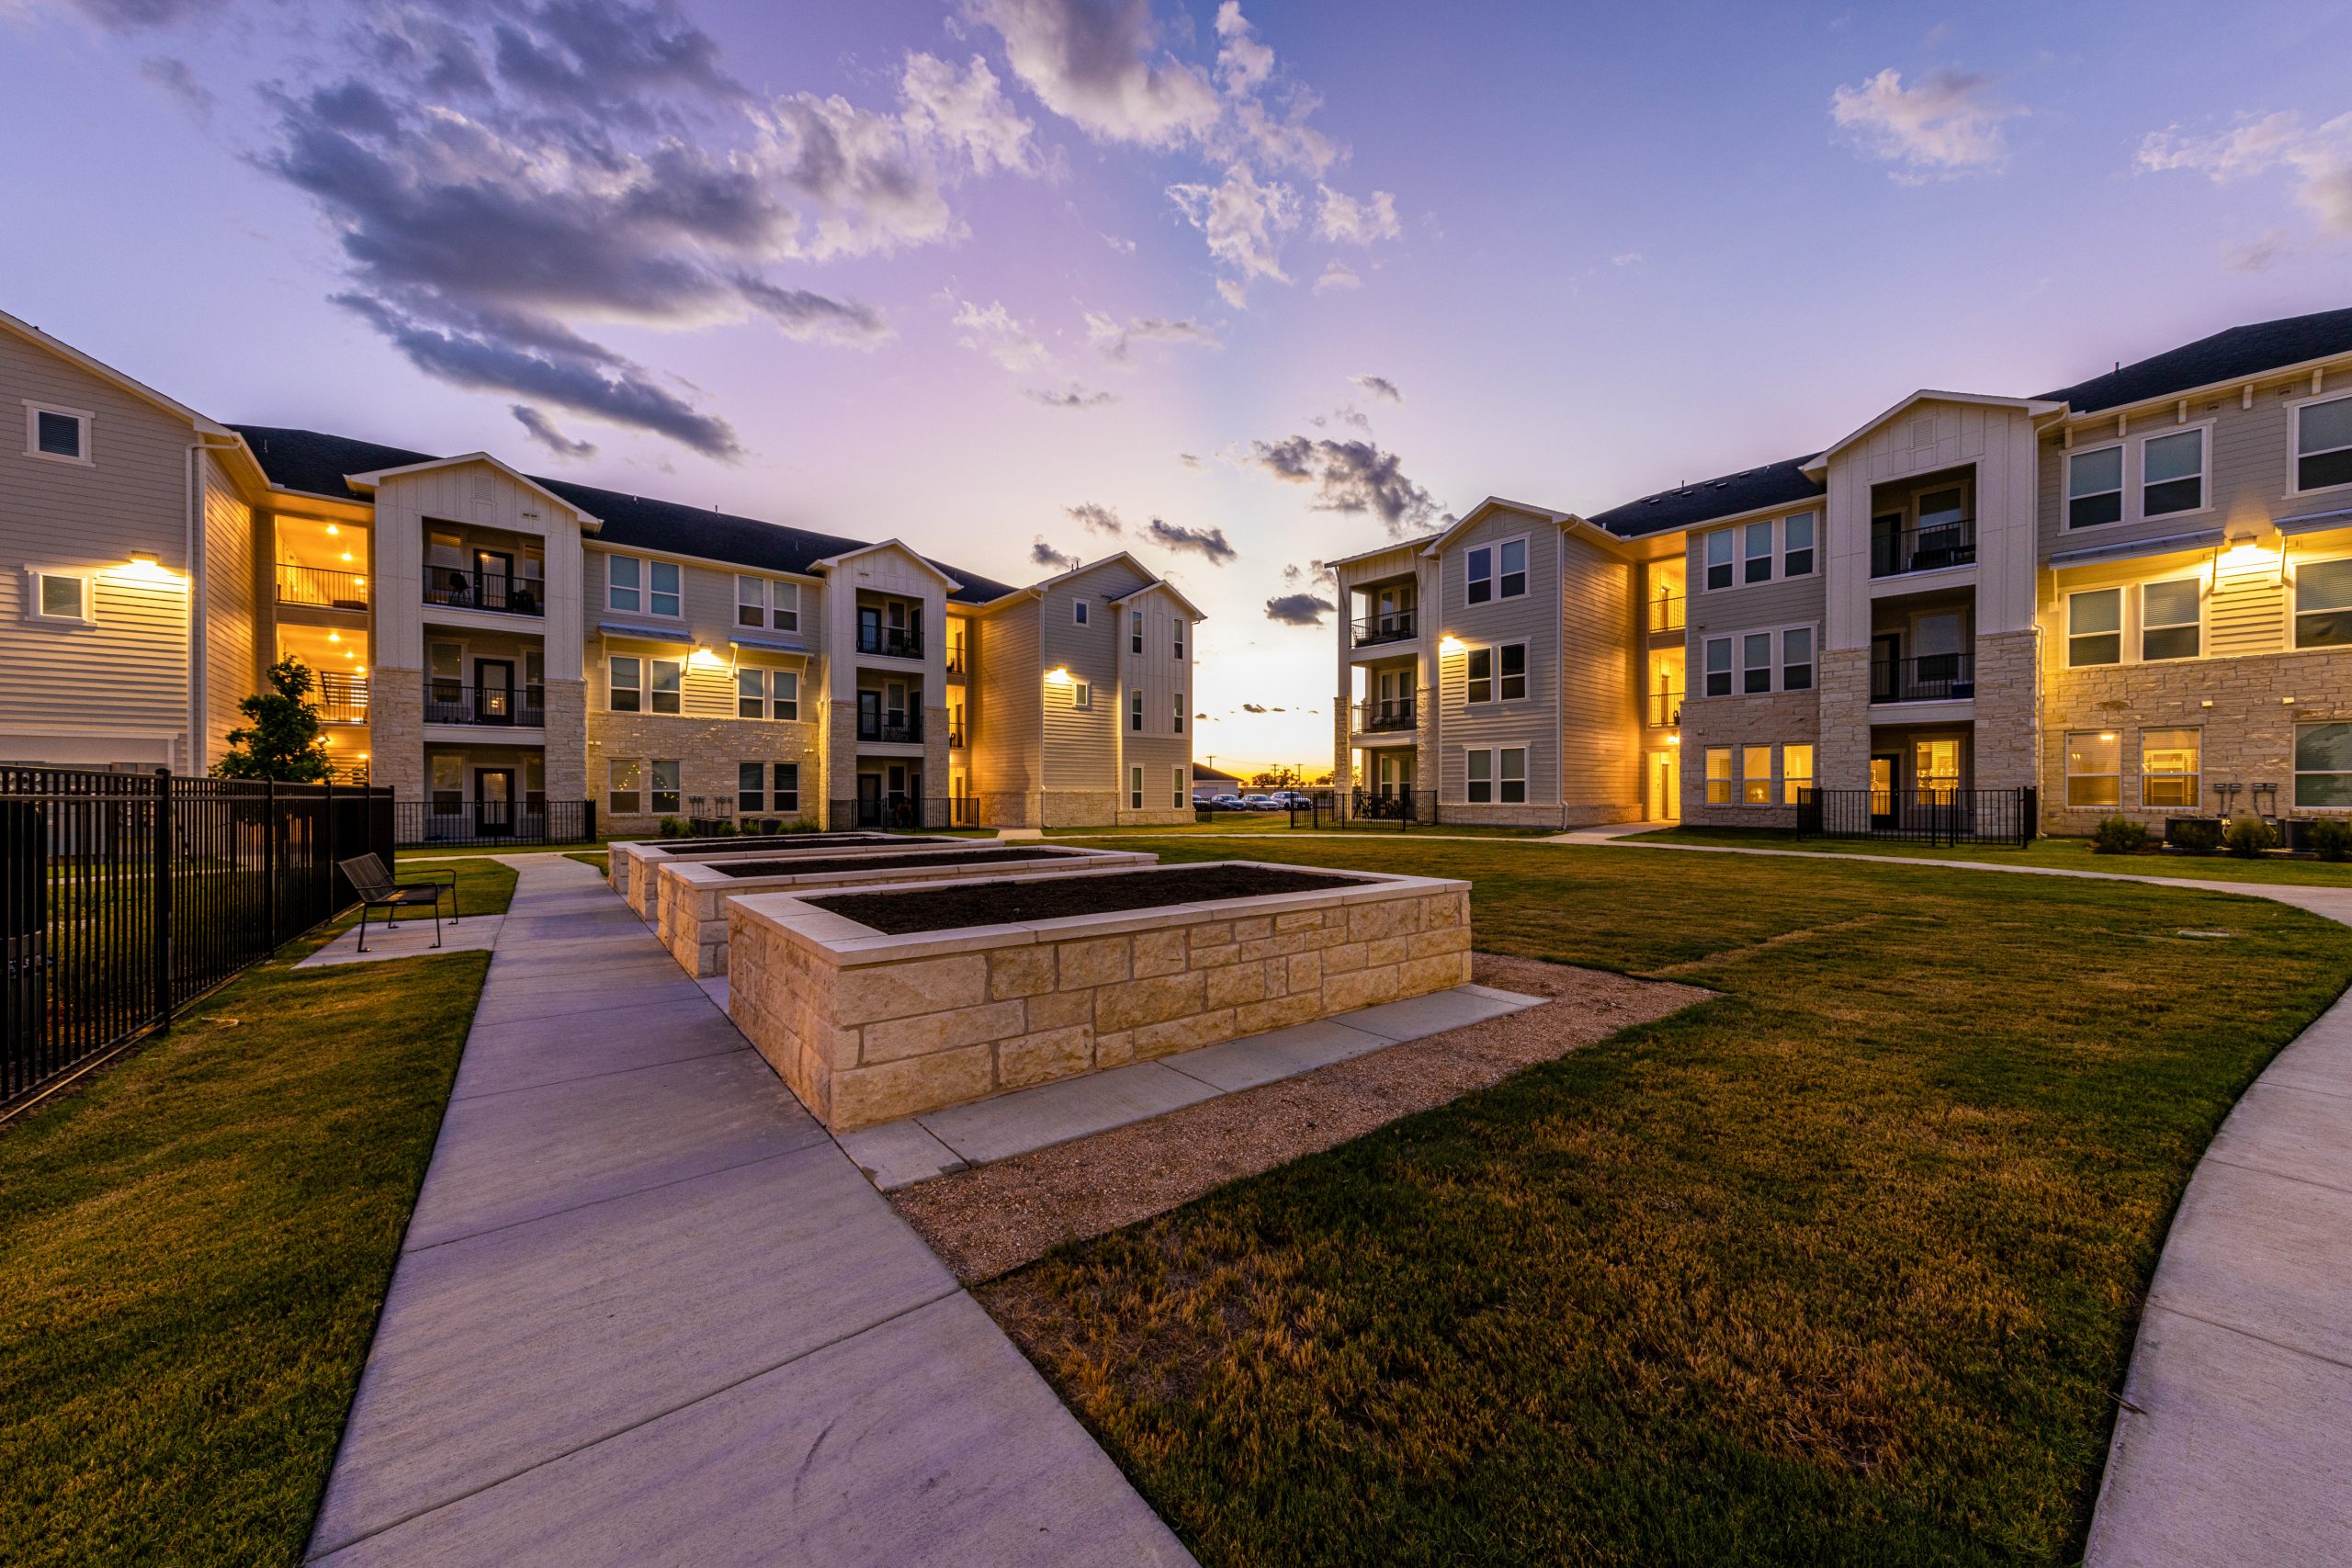 twilight view of the grounds of a multi-family commercial property